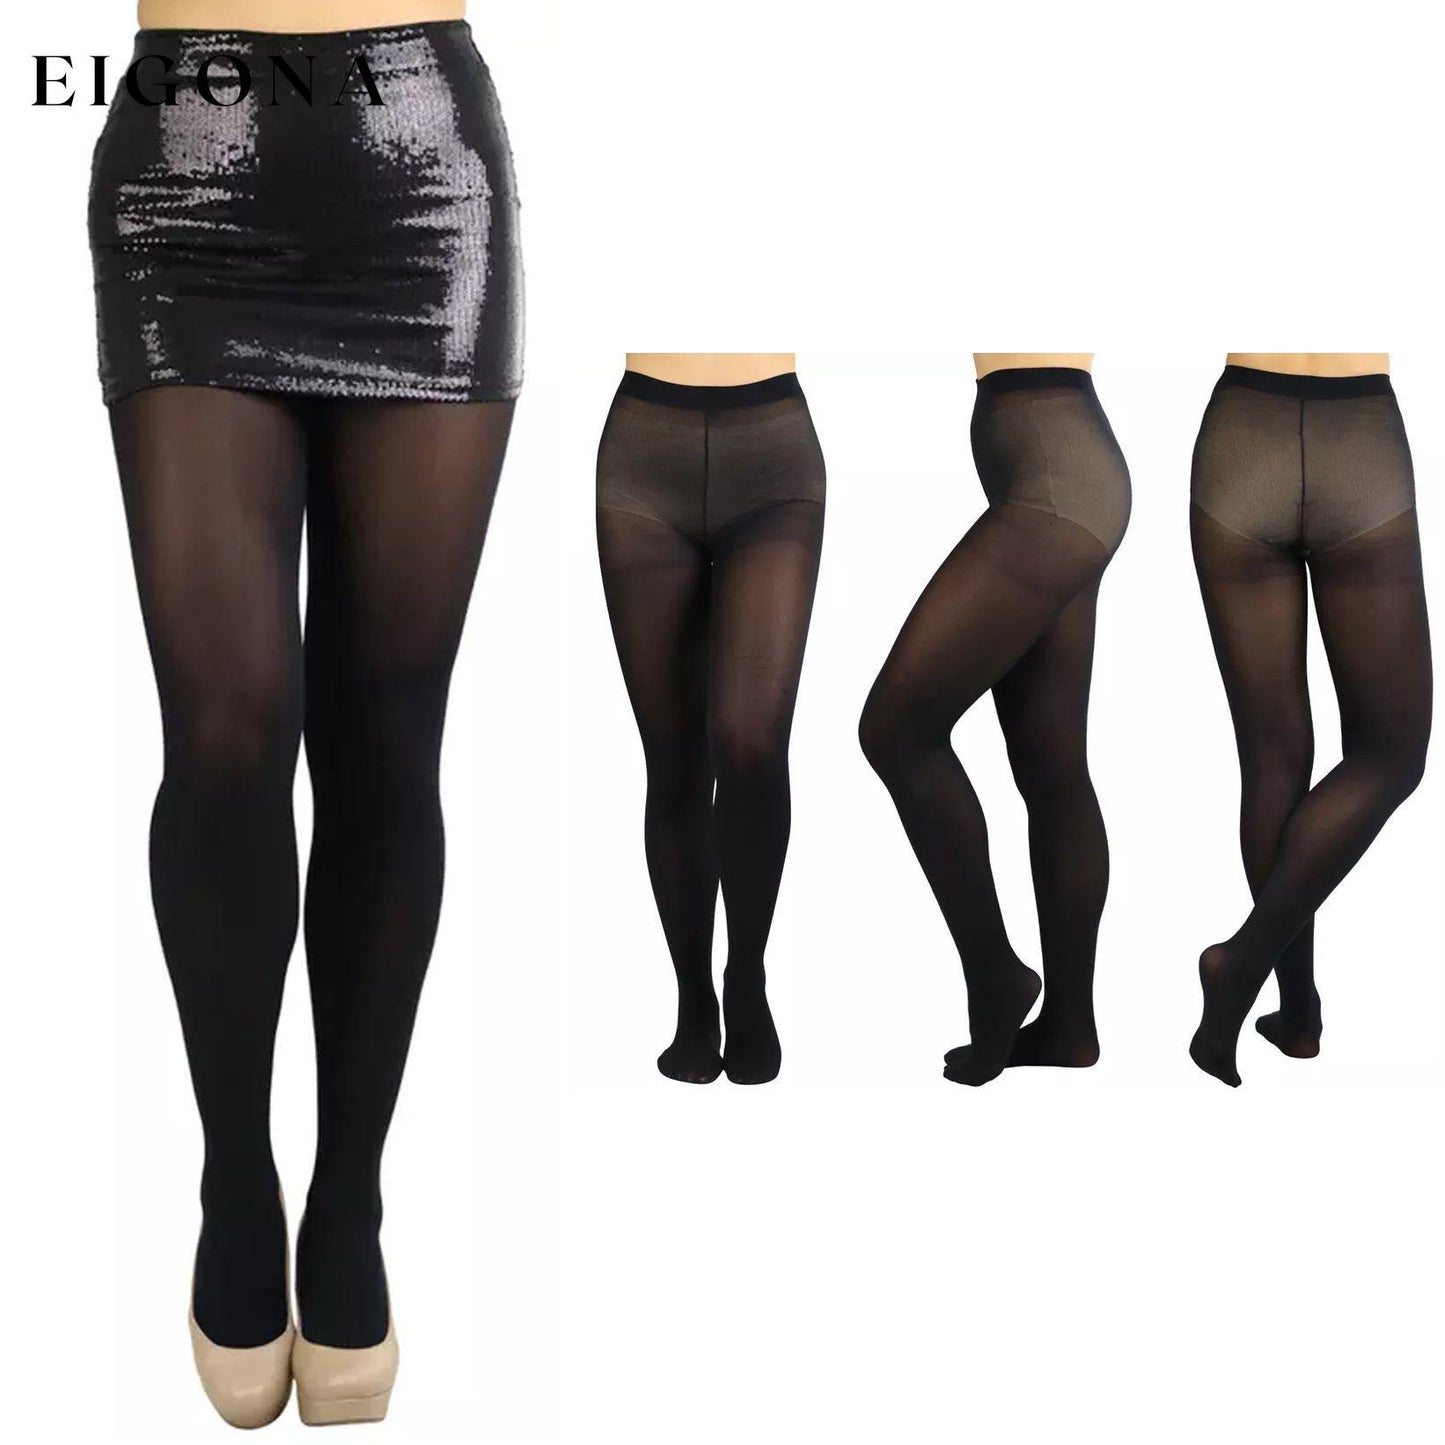 6-Pack: Women's Basic or Vibrant Semi Opaque Pantyhose Black __stock:550 lingerie refund_fee:1200